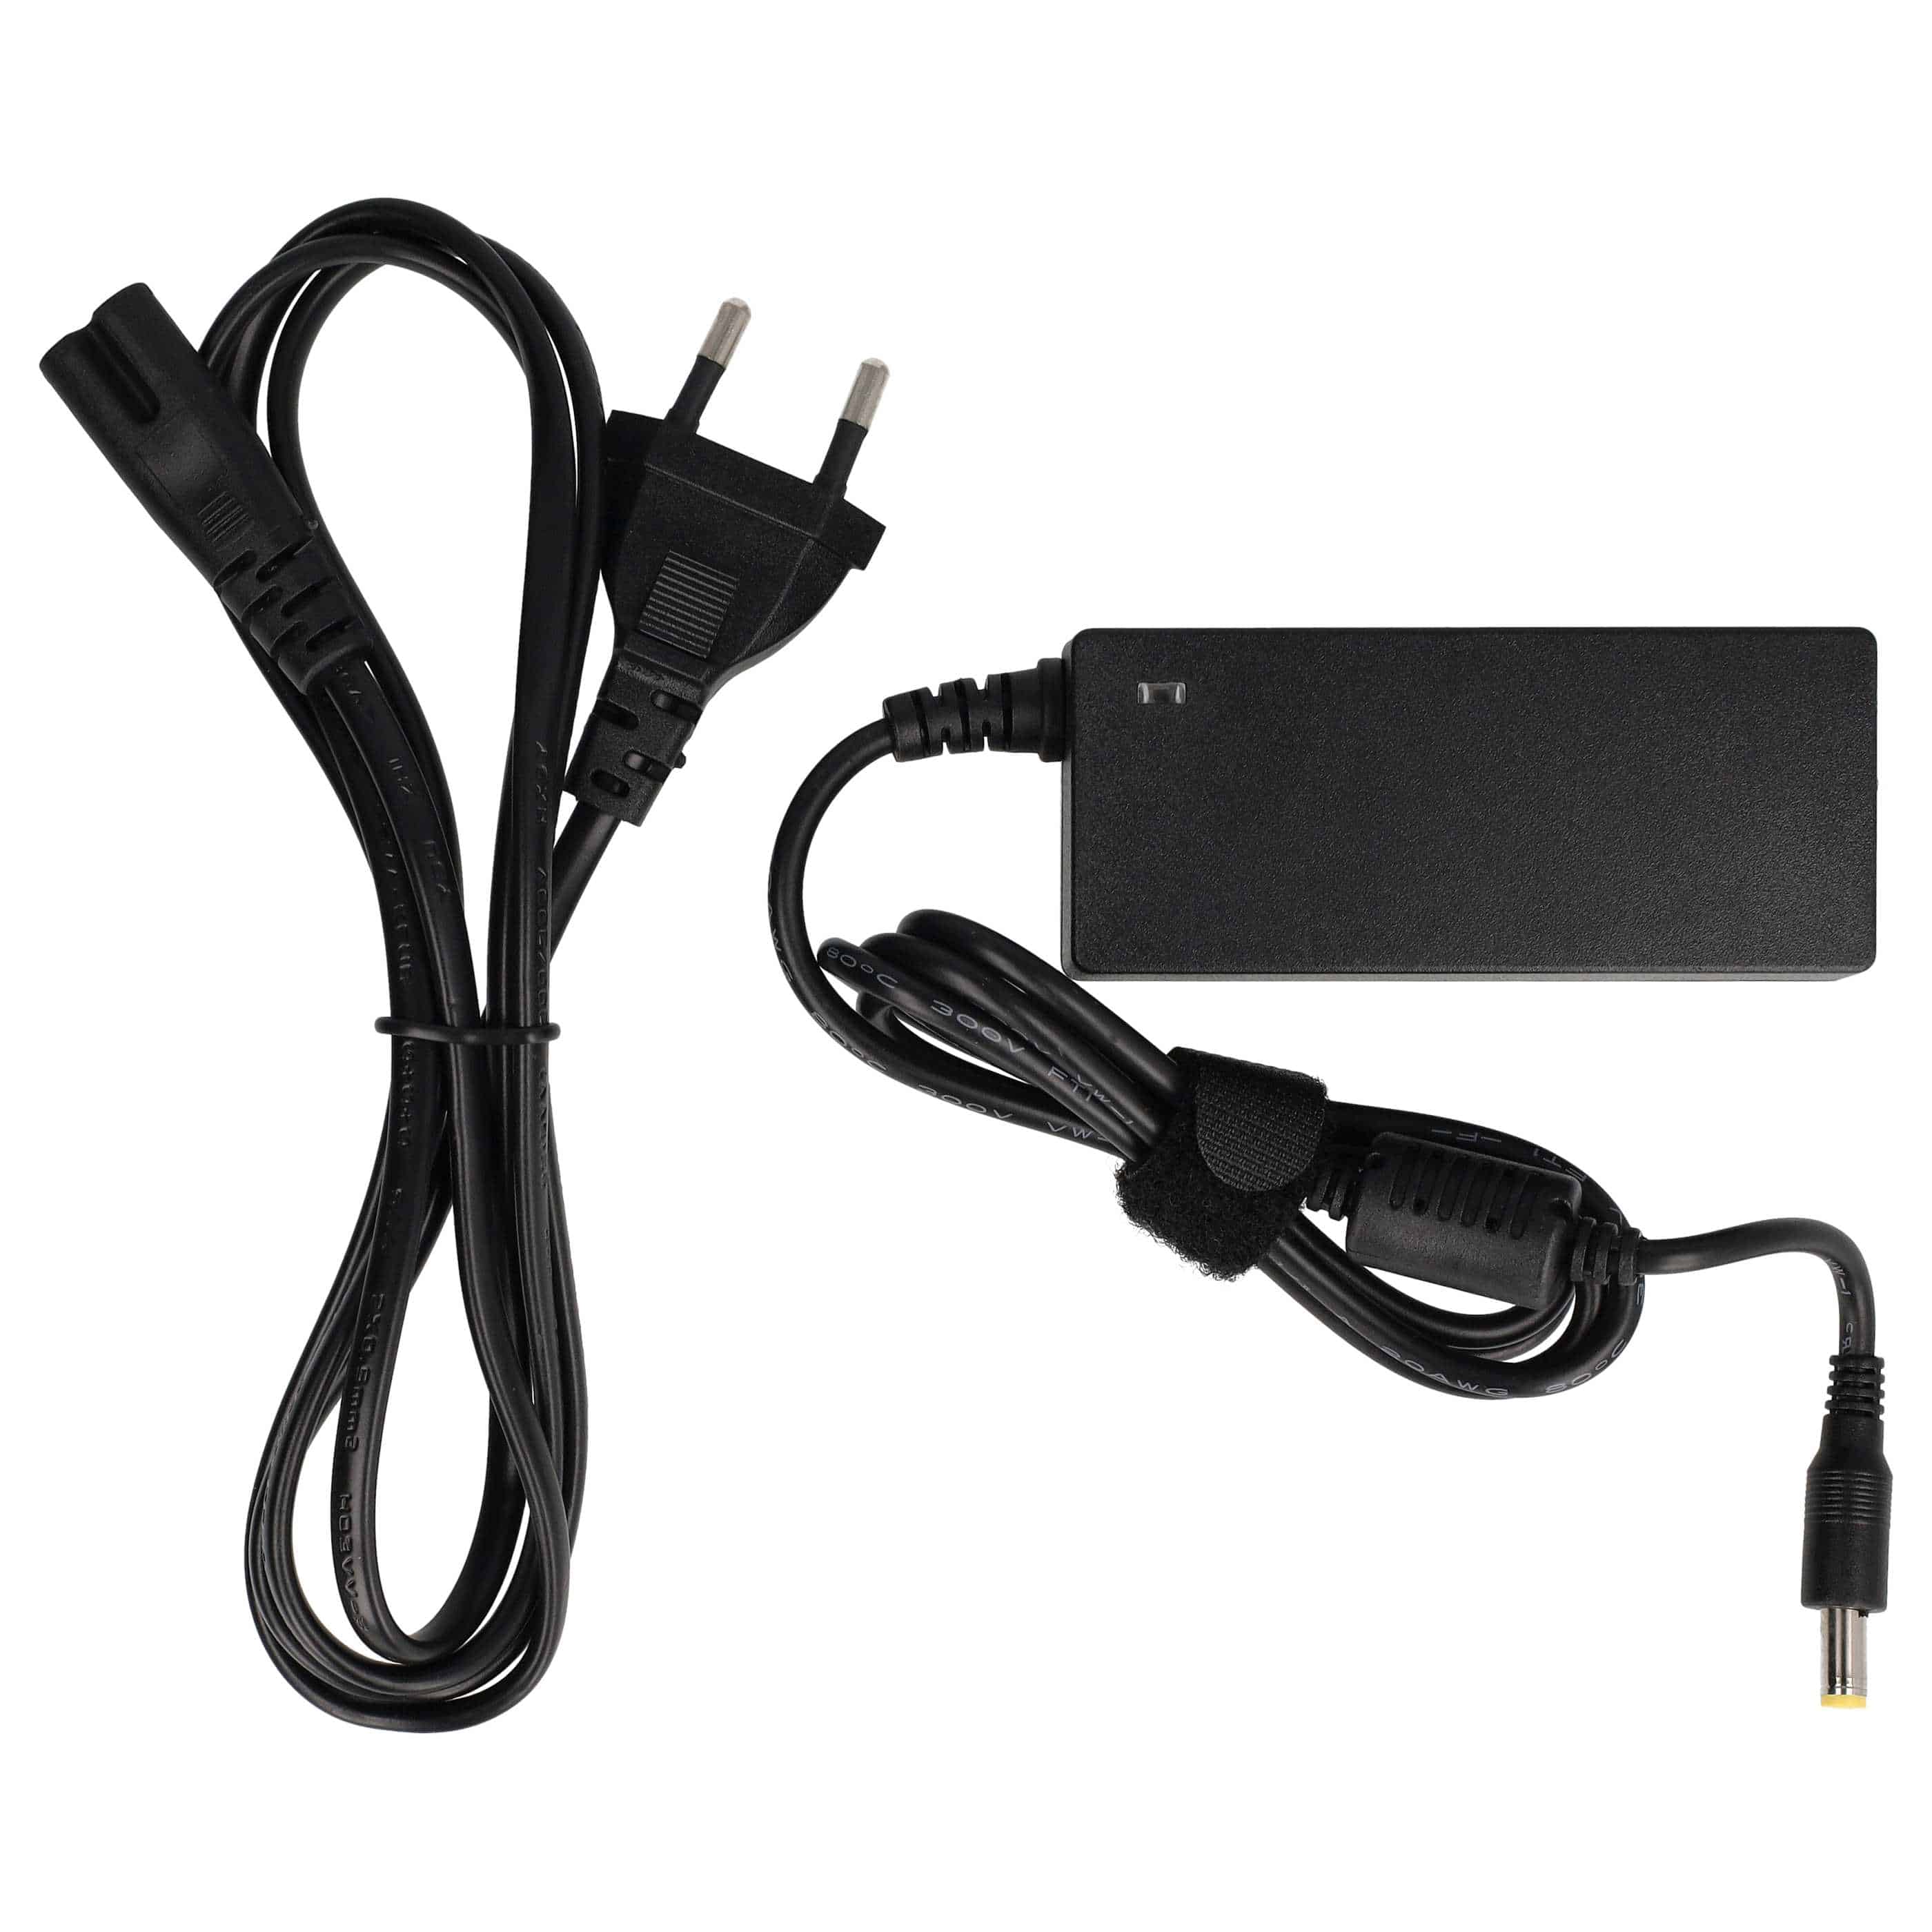 Mains Power Adapter replaces Acer ADP-30JH B for AcerNotebook etc., 30 W